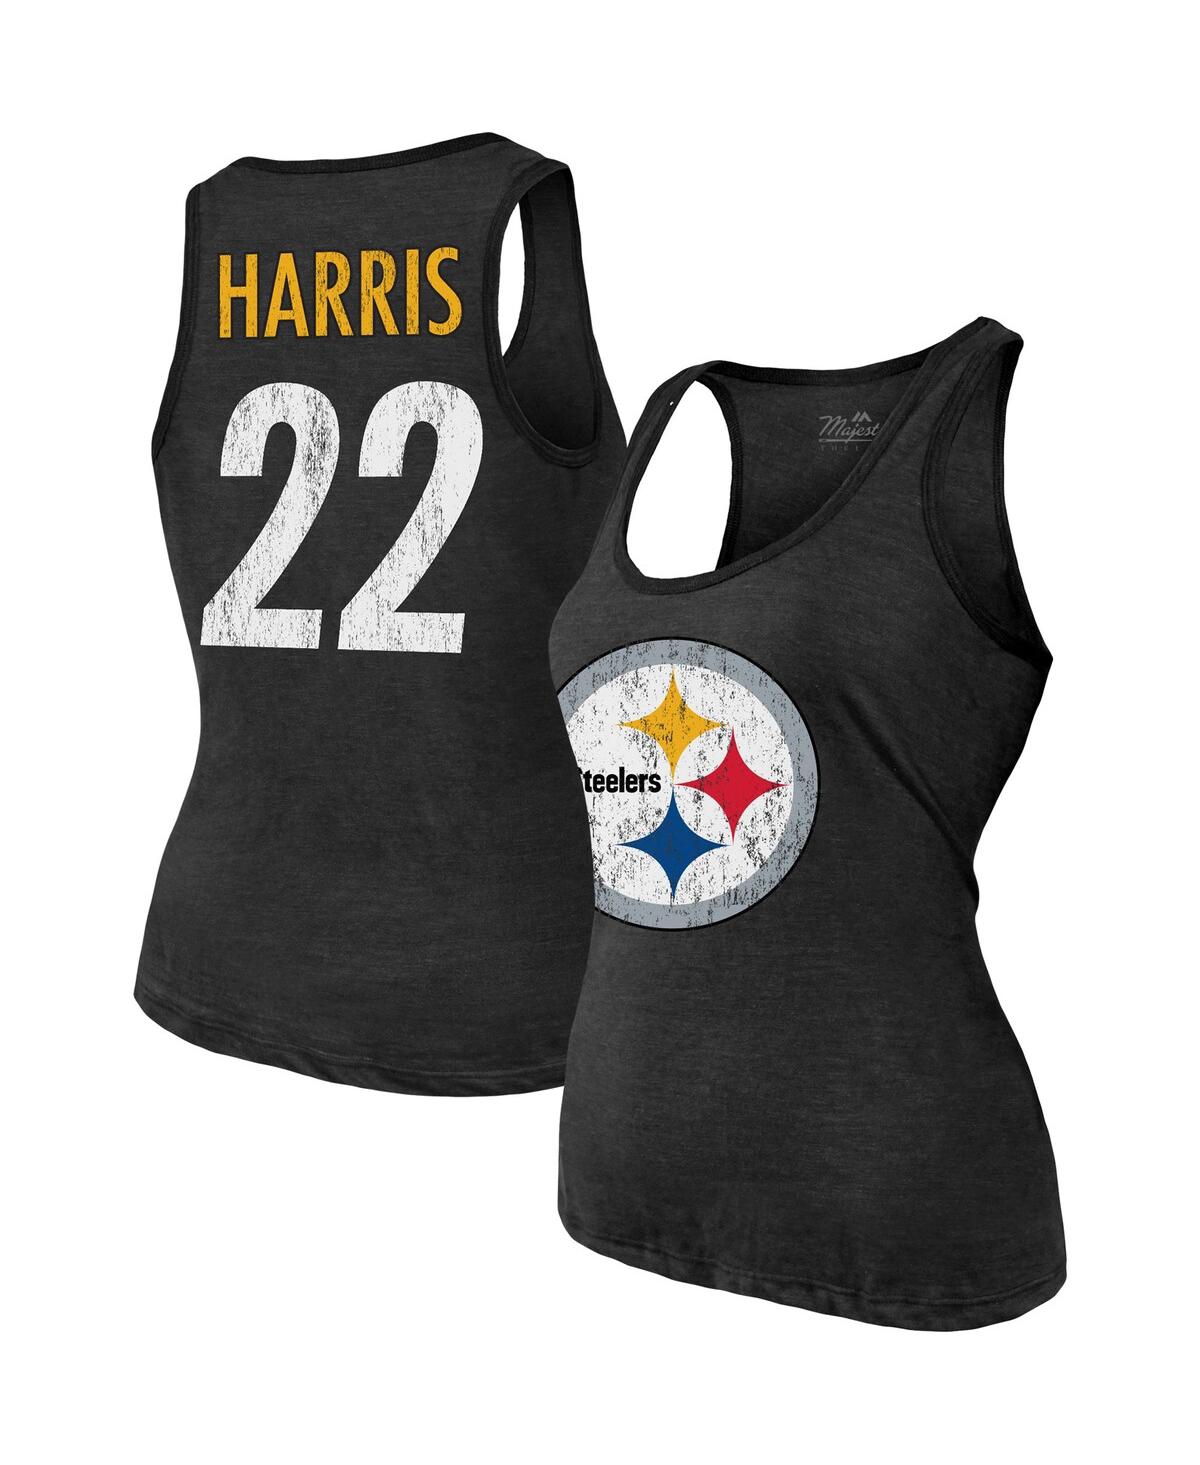 Women's Majestic Threads Najee Harris Black Pittsburgh Steelers Player Name and Number Tri-Blend Tank Top - Black